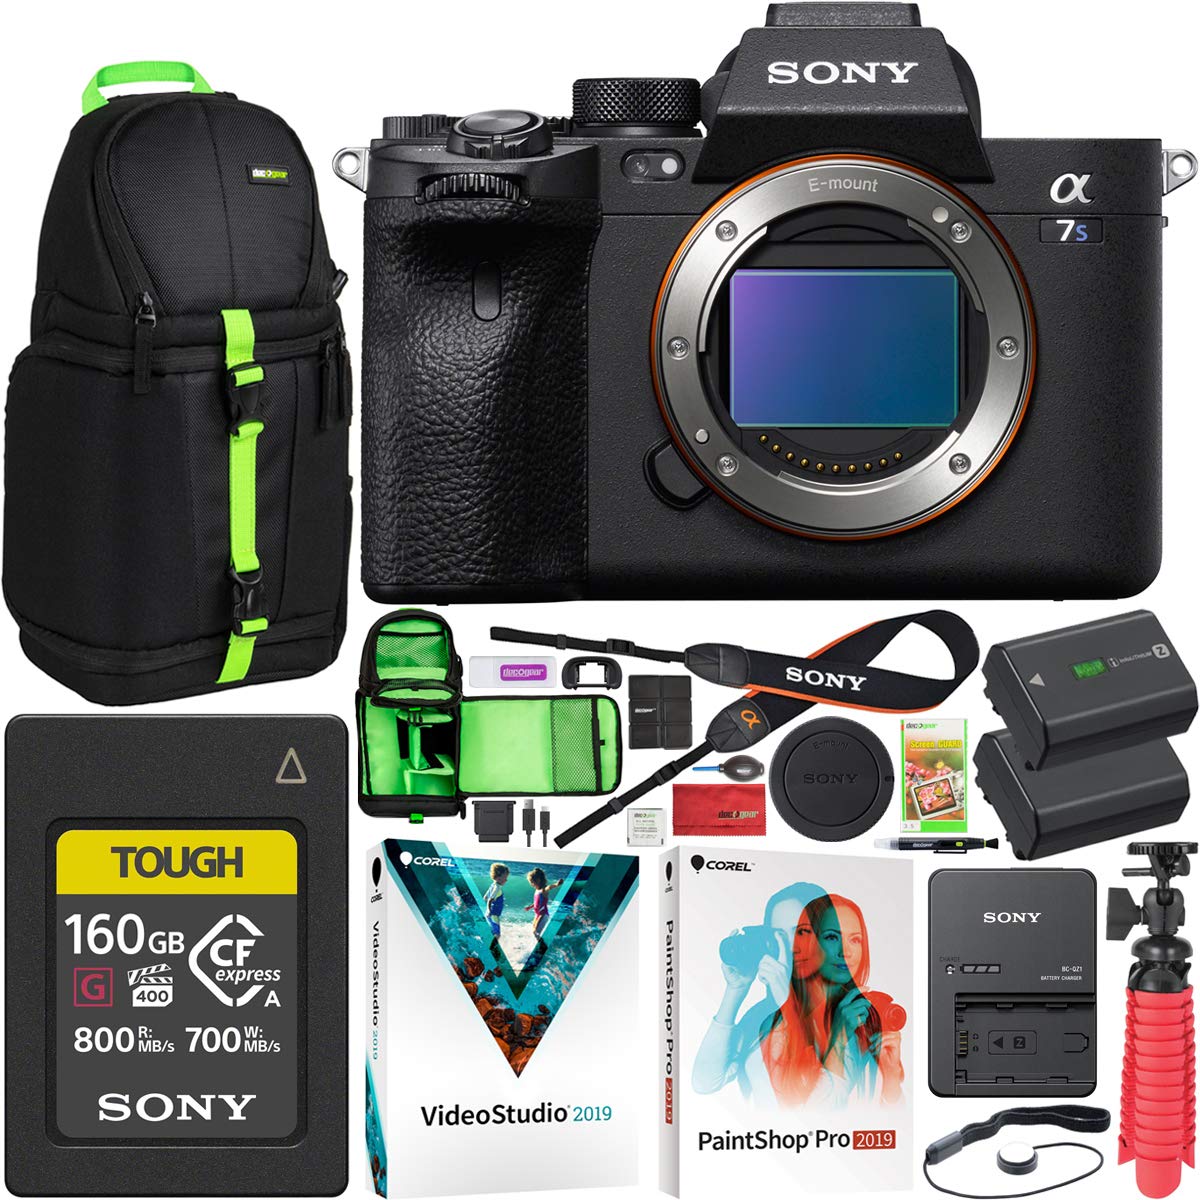 Sony a7s III ILCE-7SM3/B Mirrorless Digital Camera with 35mm Full-Frame Sensor Body Super Charged Bundle w/Sony 160GB CFexpress Type A Card + Deco Gear Backpack + Extra Battery and Kit Accessories